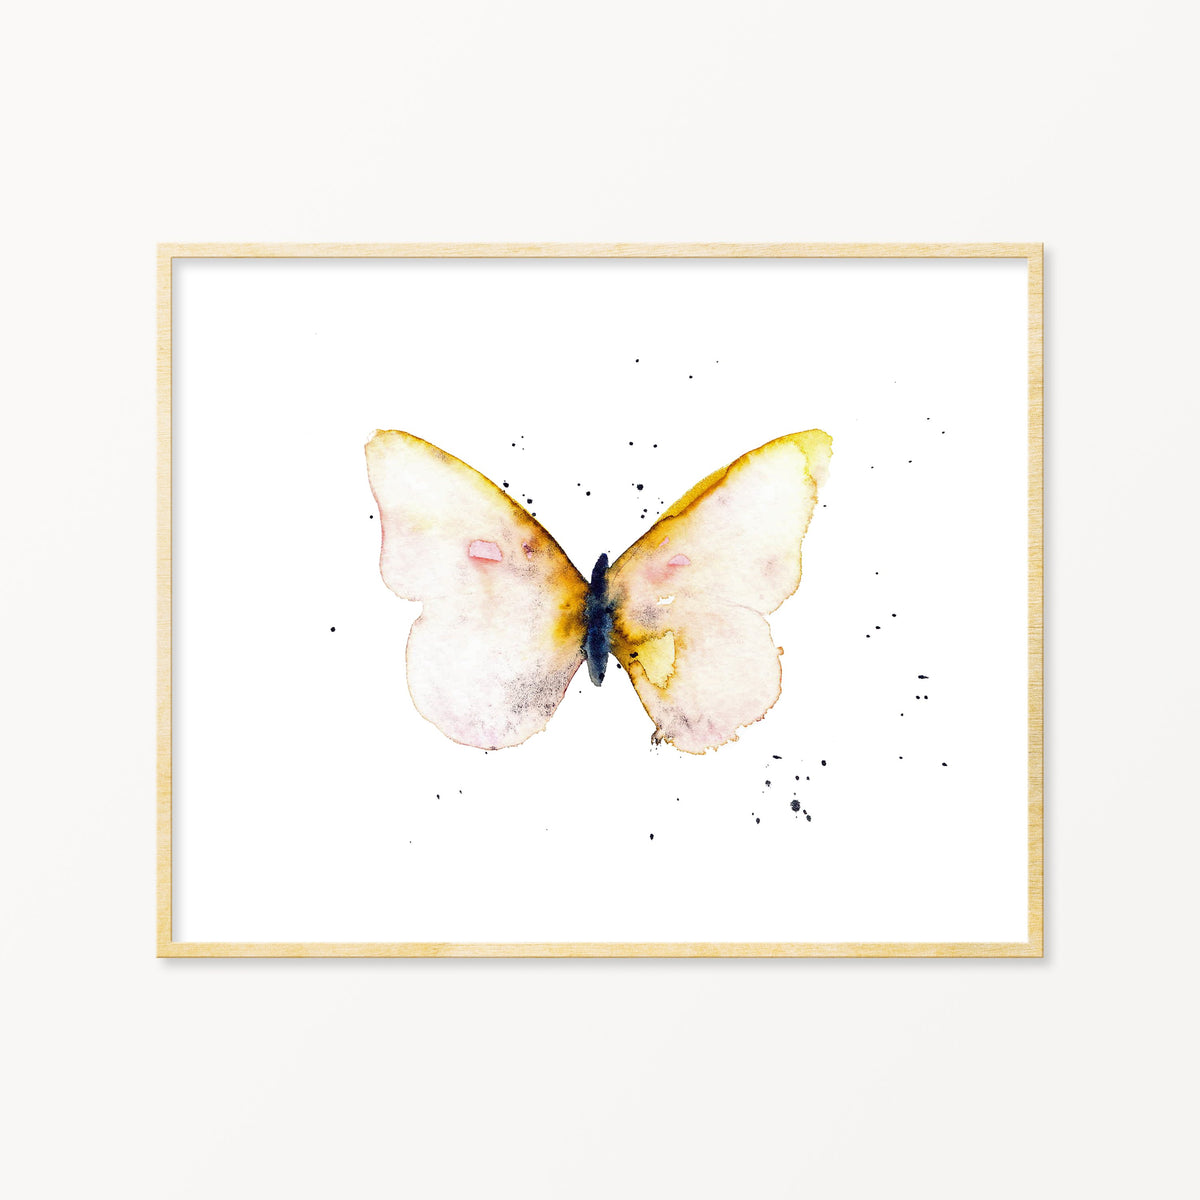 Lone Butterfly No. 10